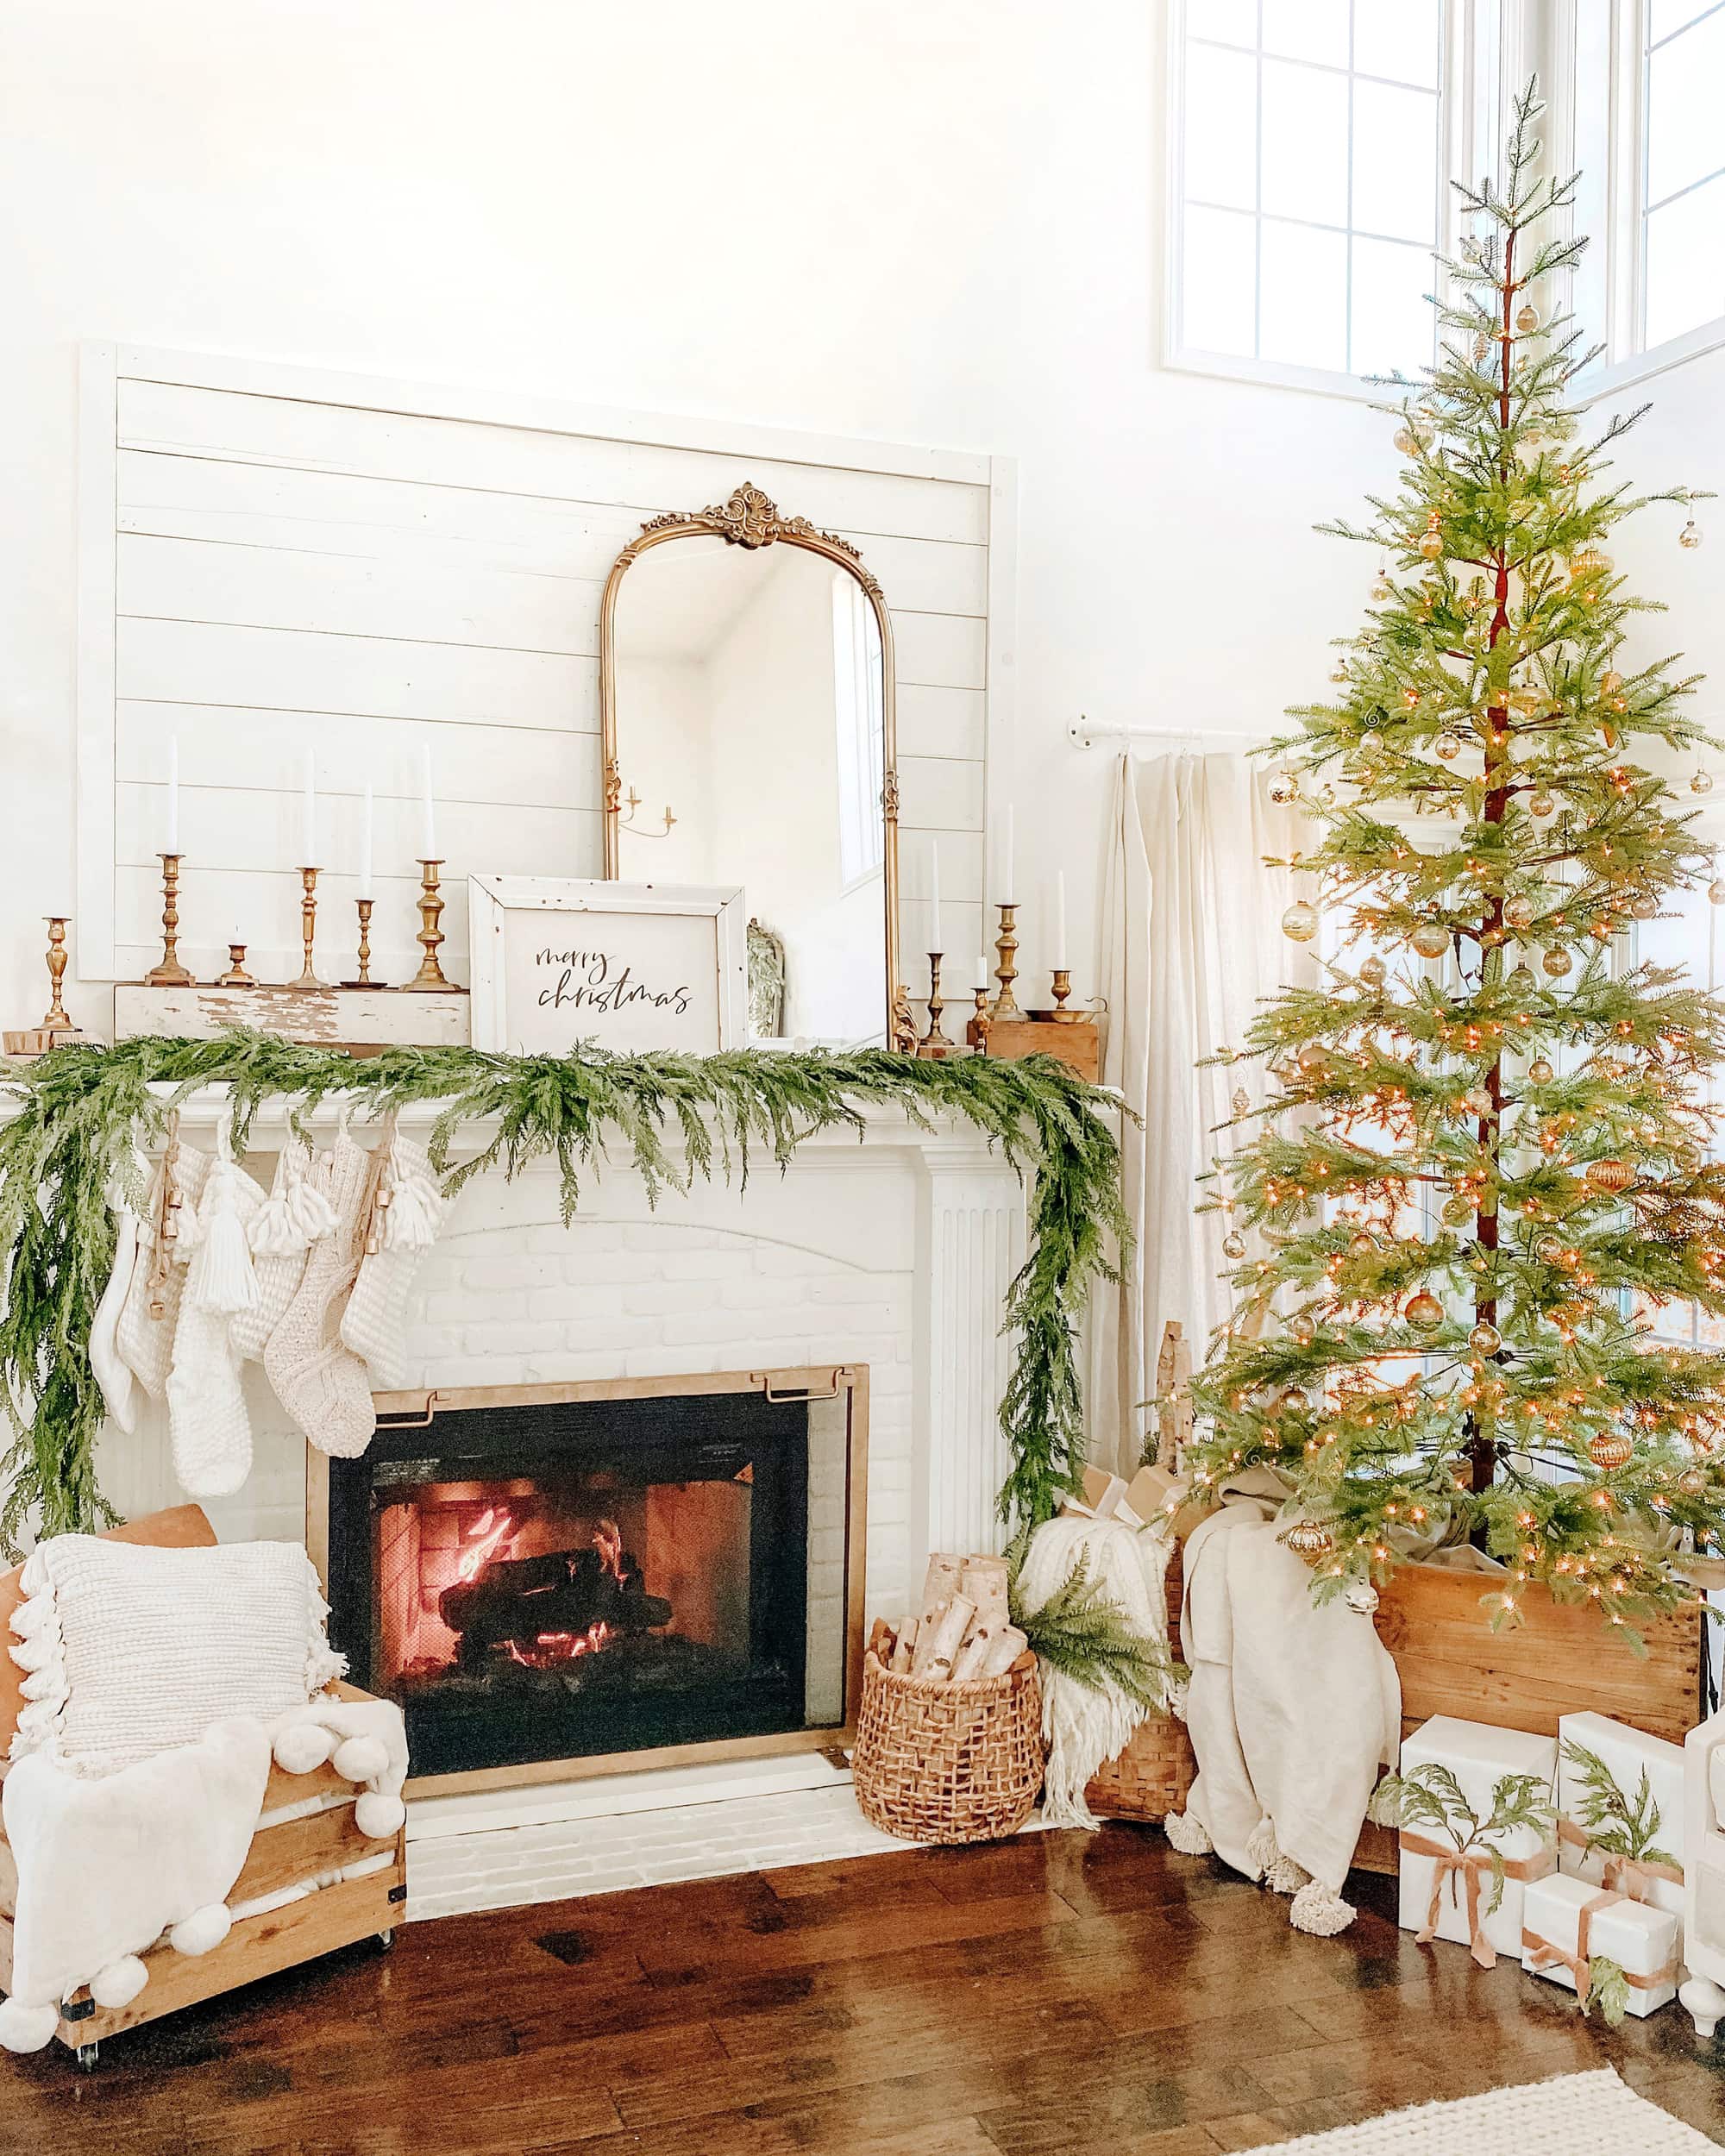 The Best Christmas Trees to Inspire Your Holidays - City Girl Gone Mom